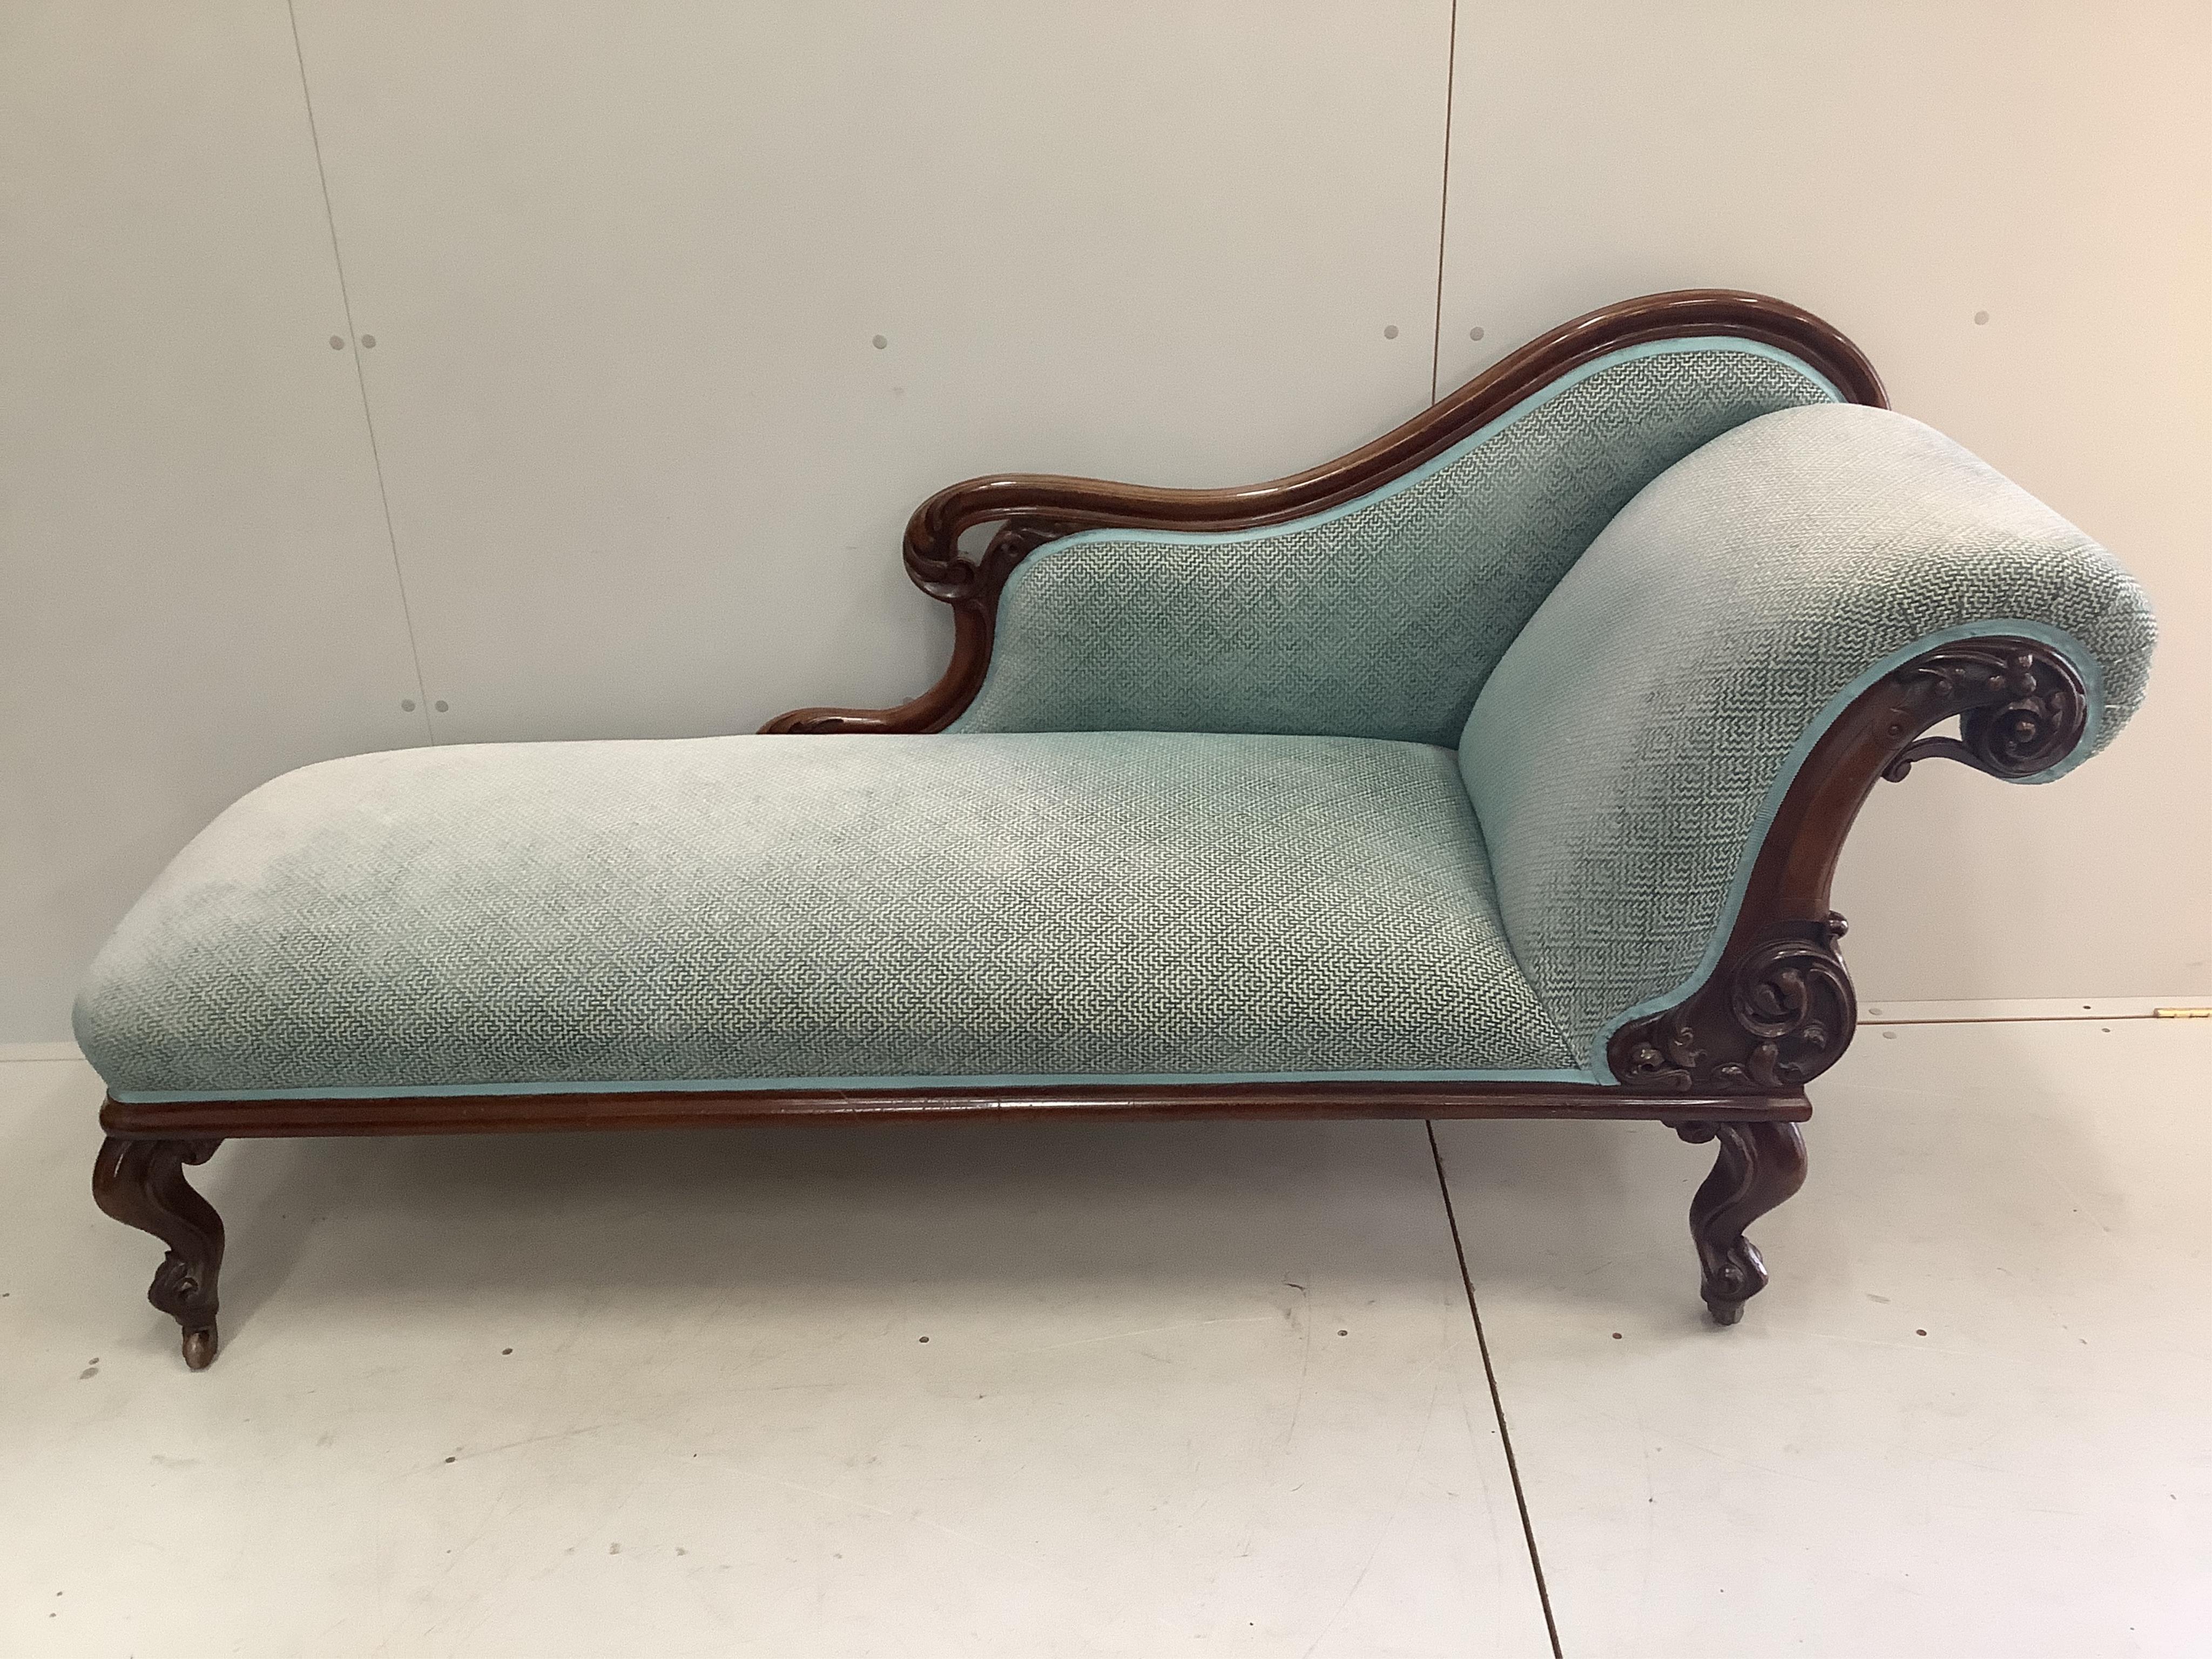 A Victorian upholstered mahogany chaise longue, width 190cm, depth 61cm, height 94cm. Condition - good